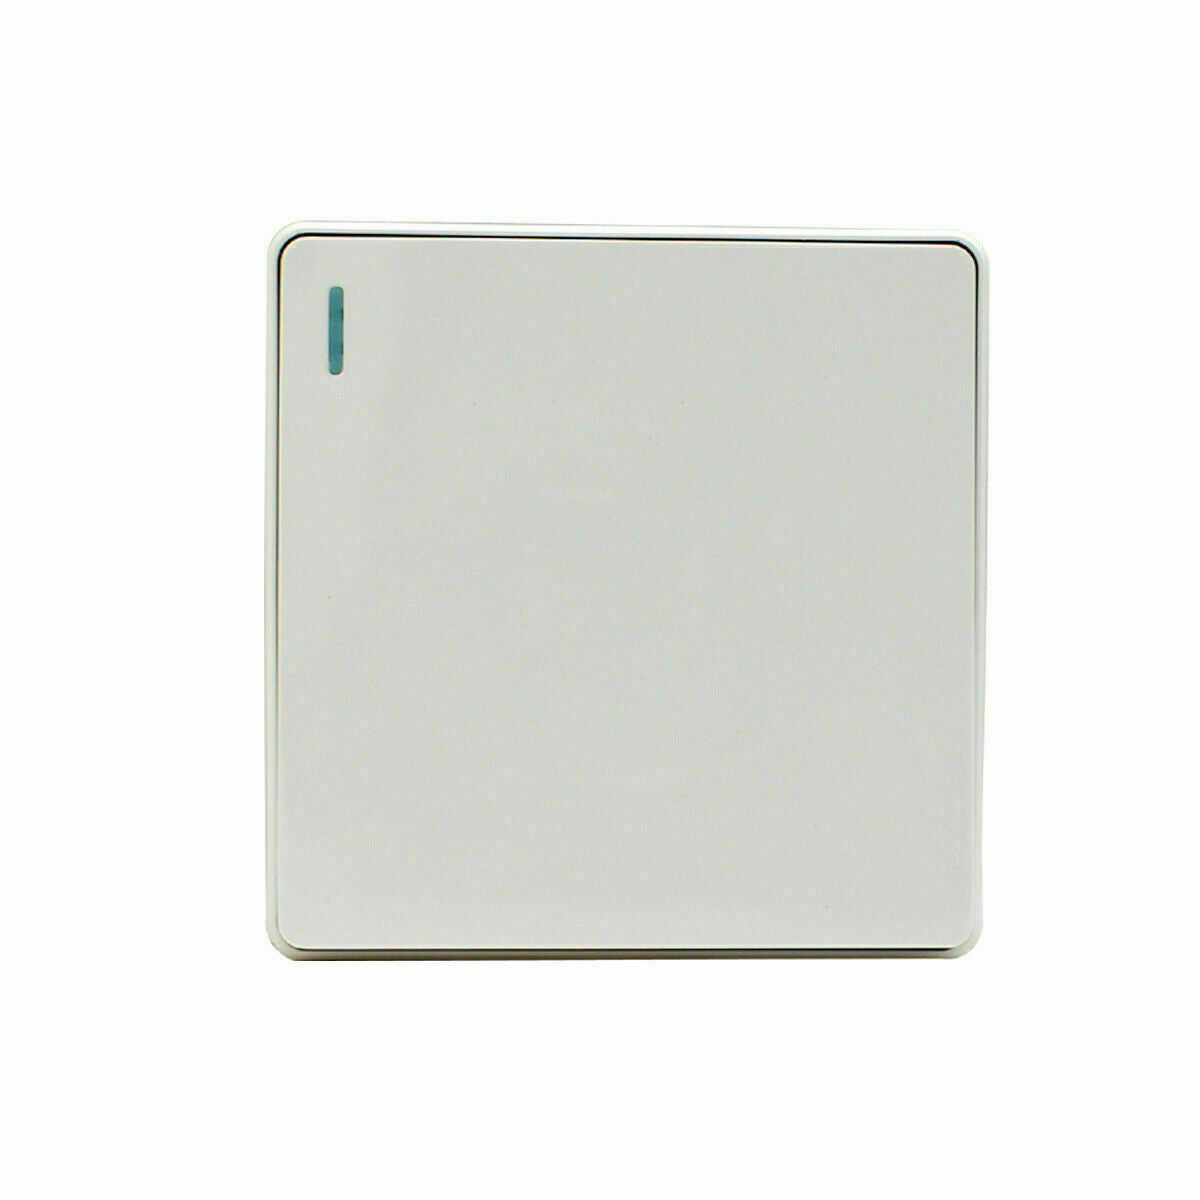 Screw less 1 Gang Wall Light Switch White Color